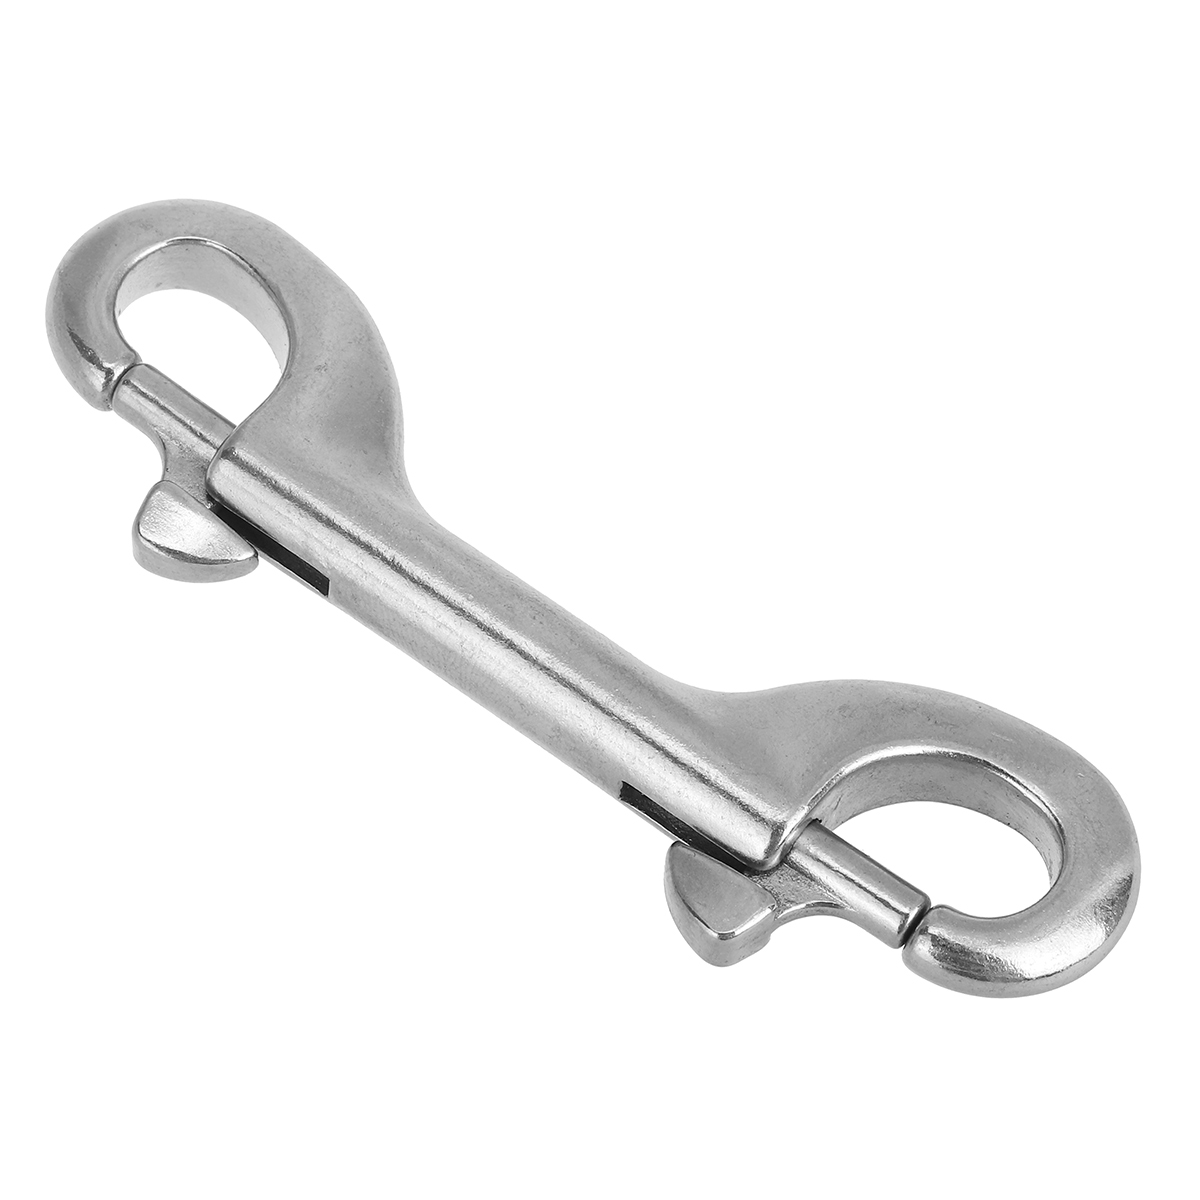 Double-End-Bolt-Snap-316-Stainless-Steel-Hook-Marine-Grade-Diving-Clips-Snap-Key-1724912-5